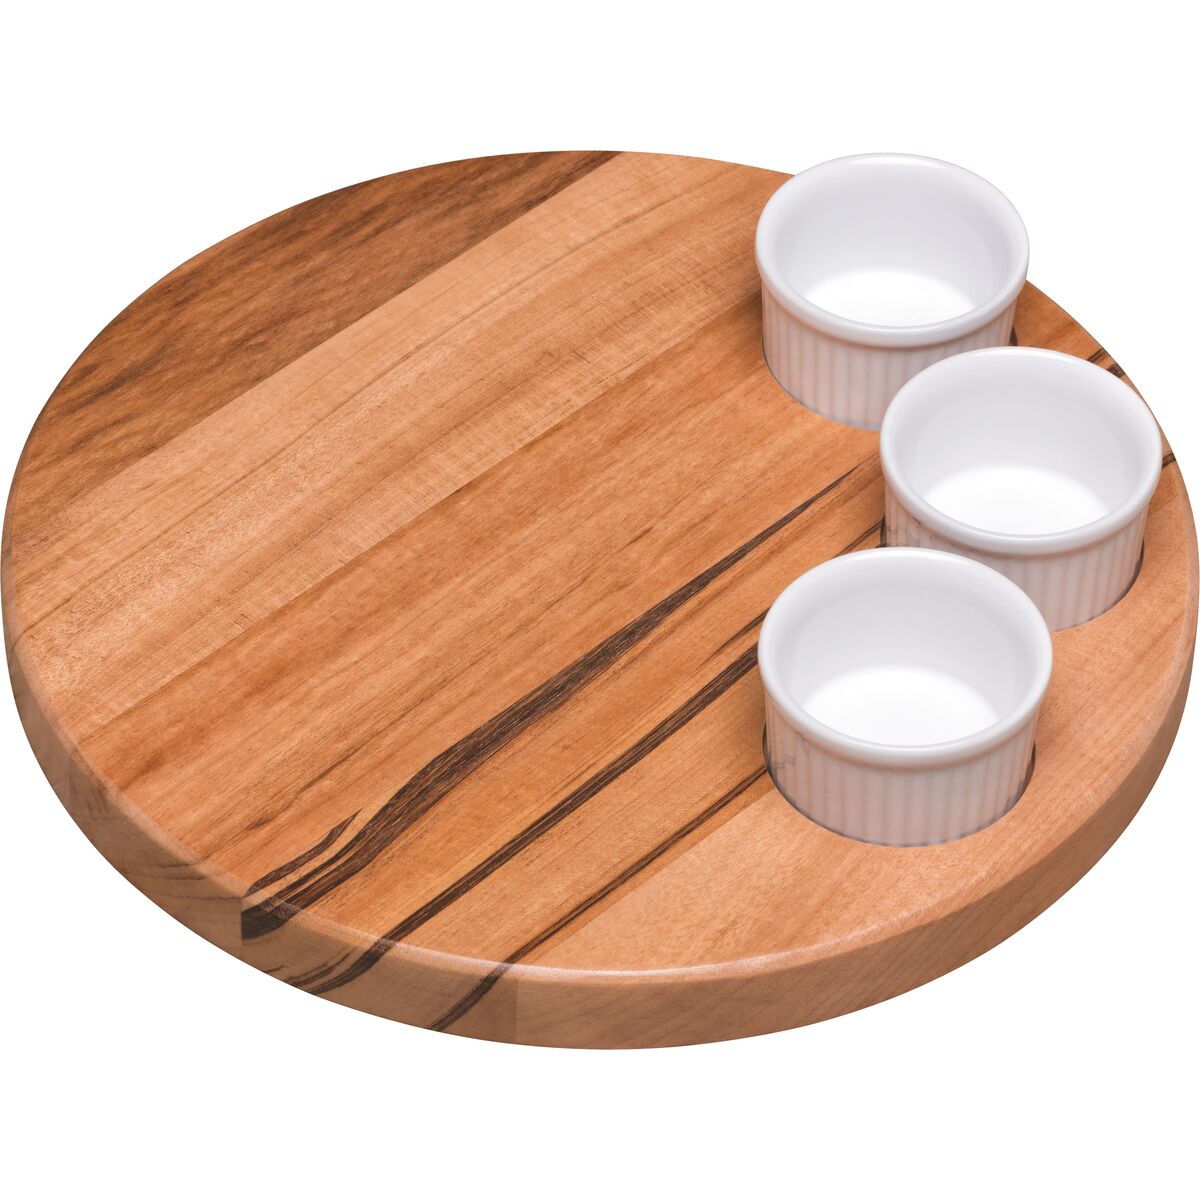 Tramontina Snack Board in Muiracatiara Wood with porcelain bowls - 4 pieces